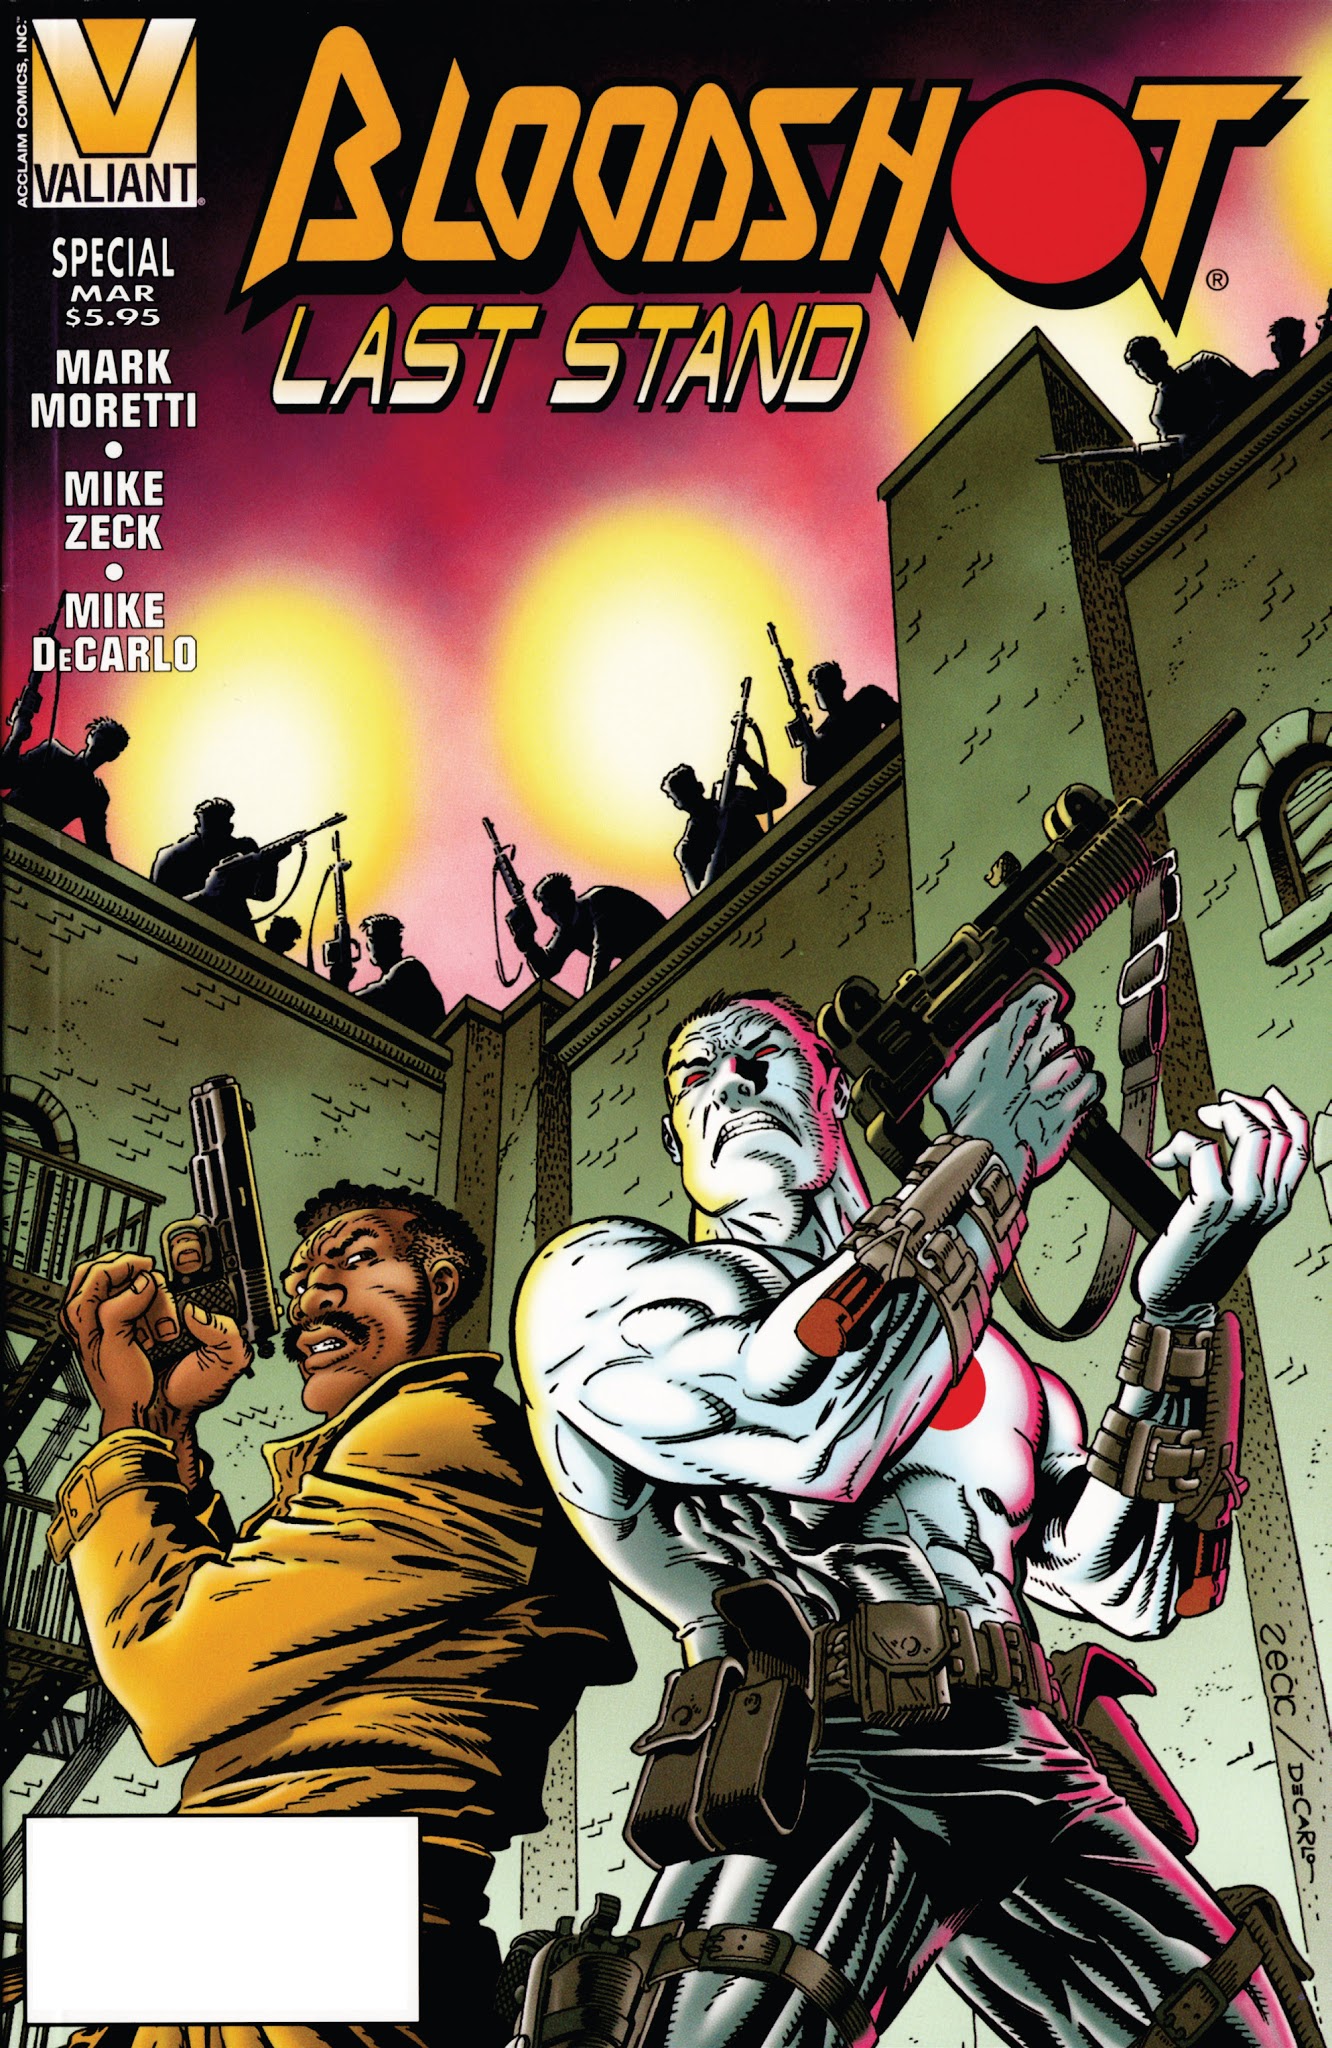 Read online Bloodshot: Last Stand comic -  Issue # Full - 1